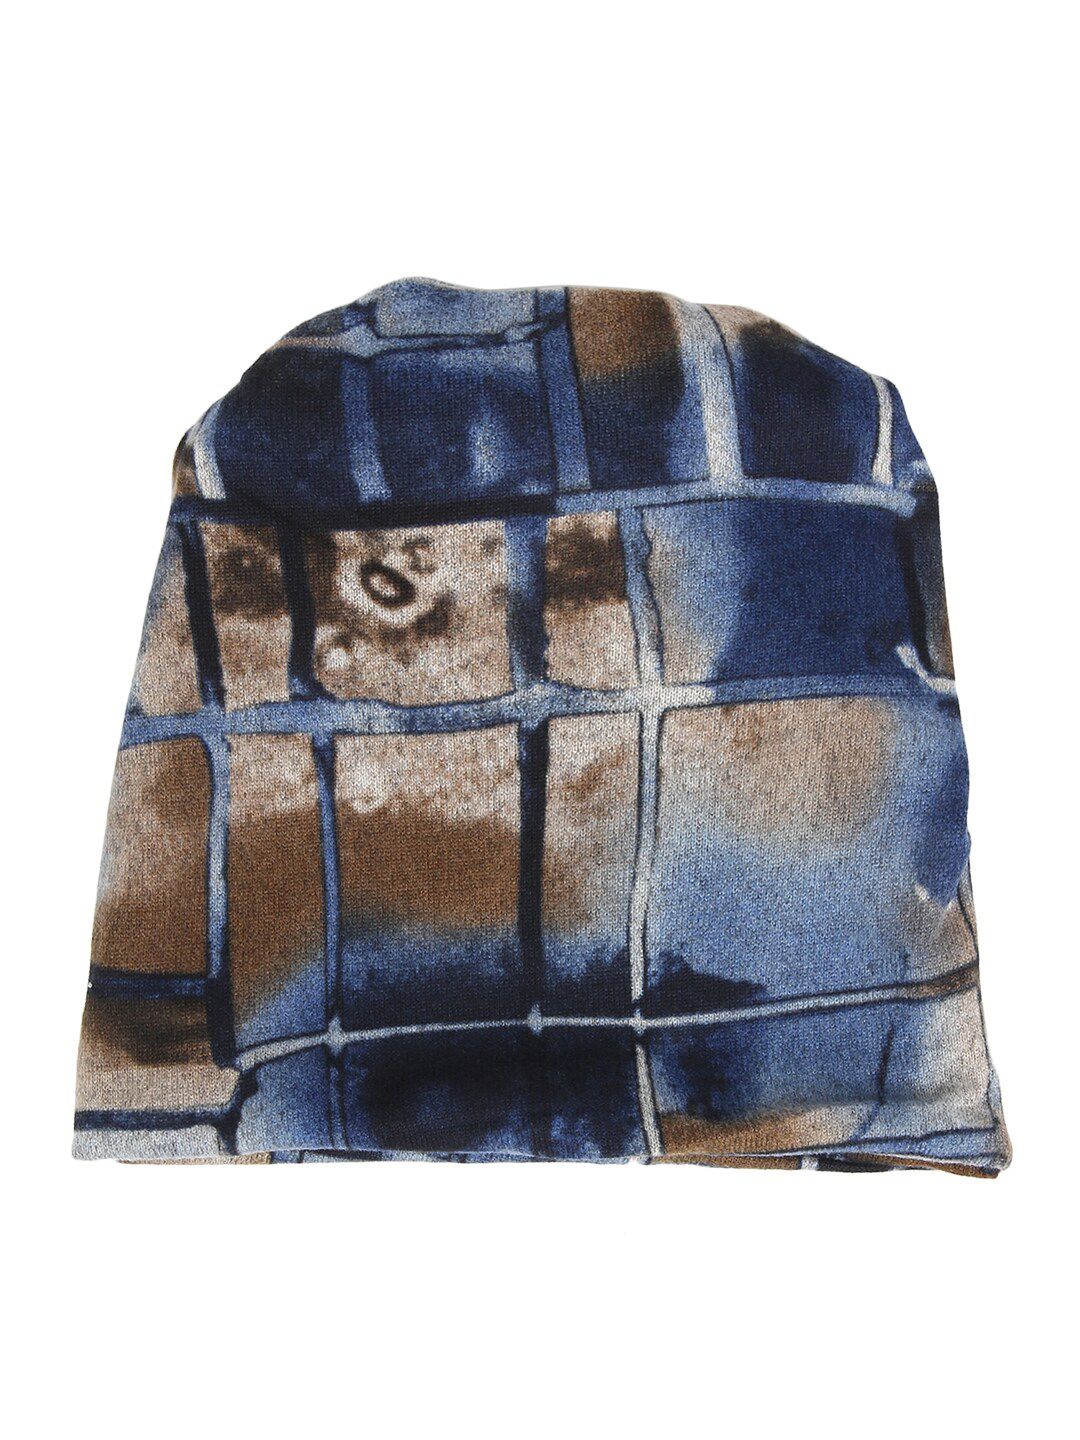 iSWEVEN Unisex Beige & Blue Printed Beanie Price in India